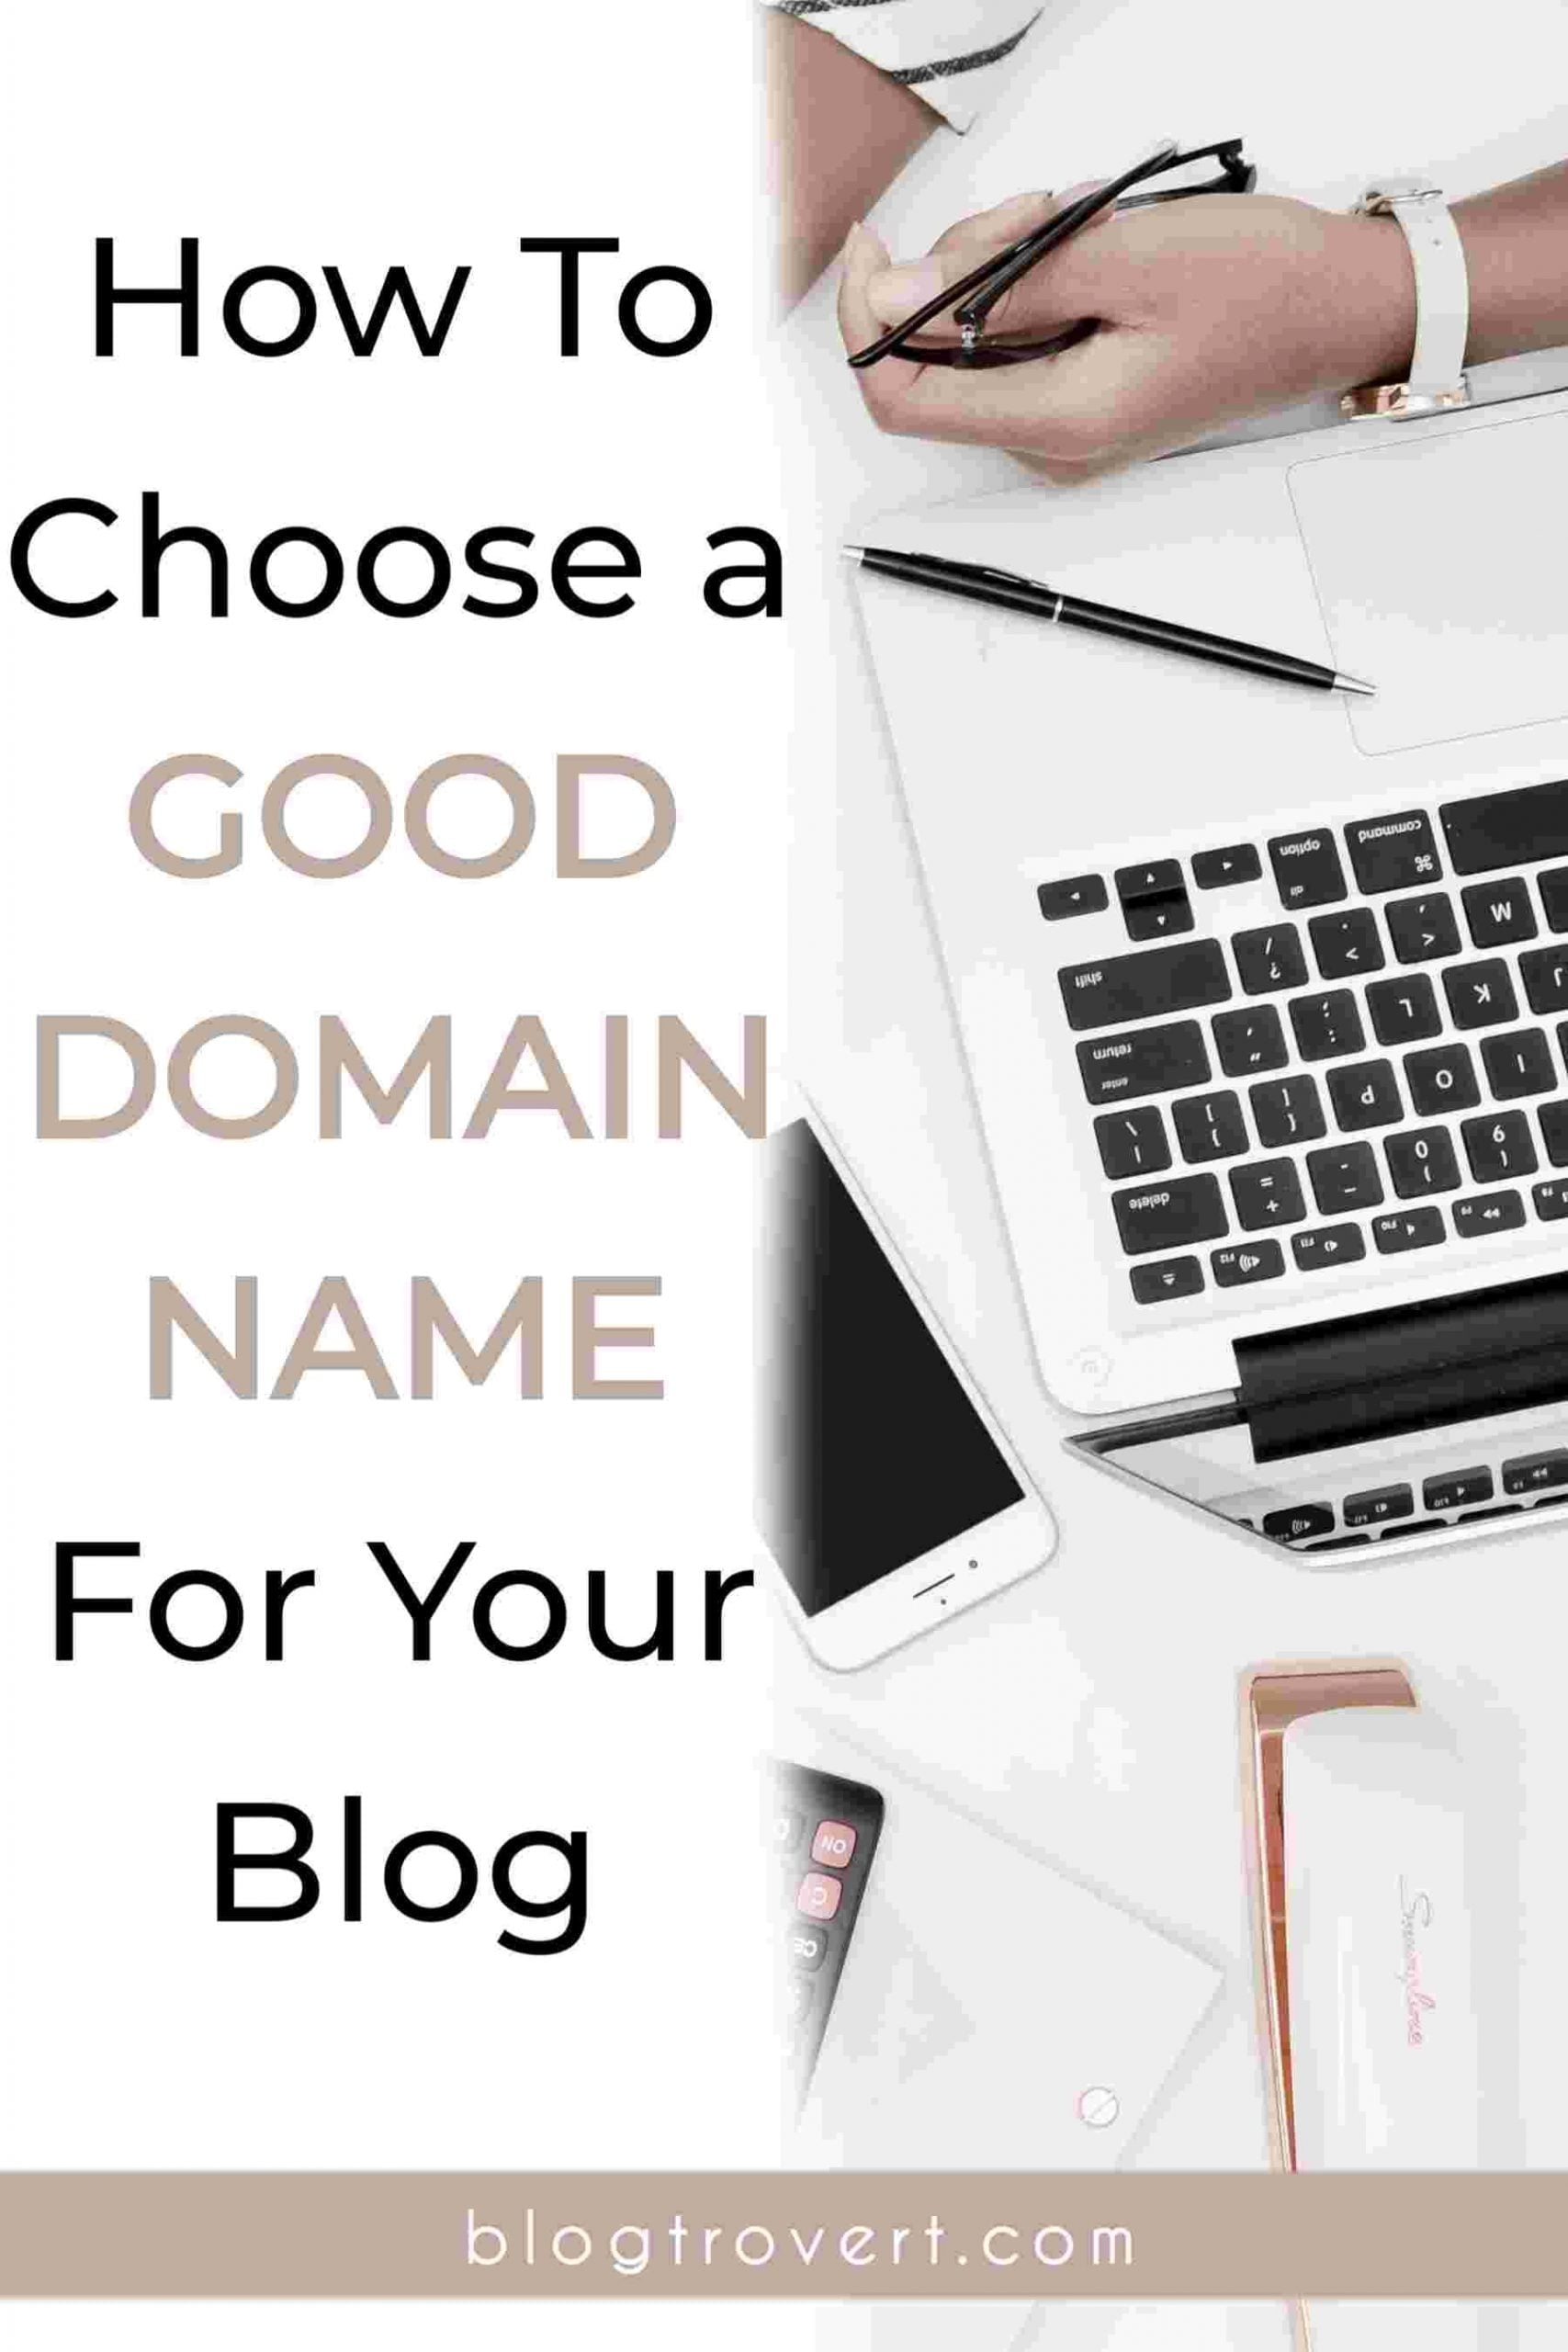 How To Choose a Good Domain Name For Your Blog; 13 Essential Tips 1